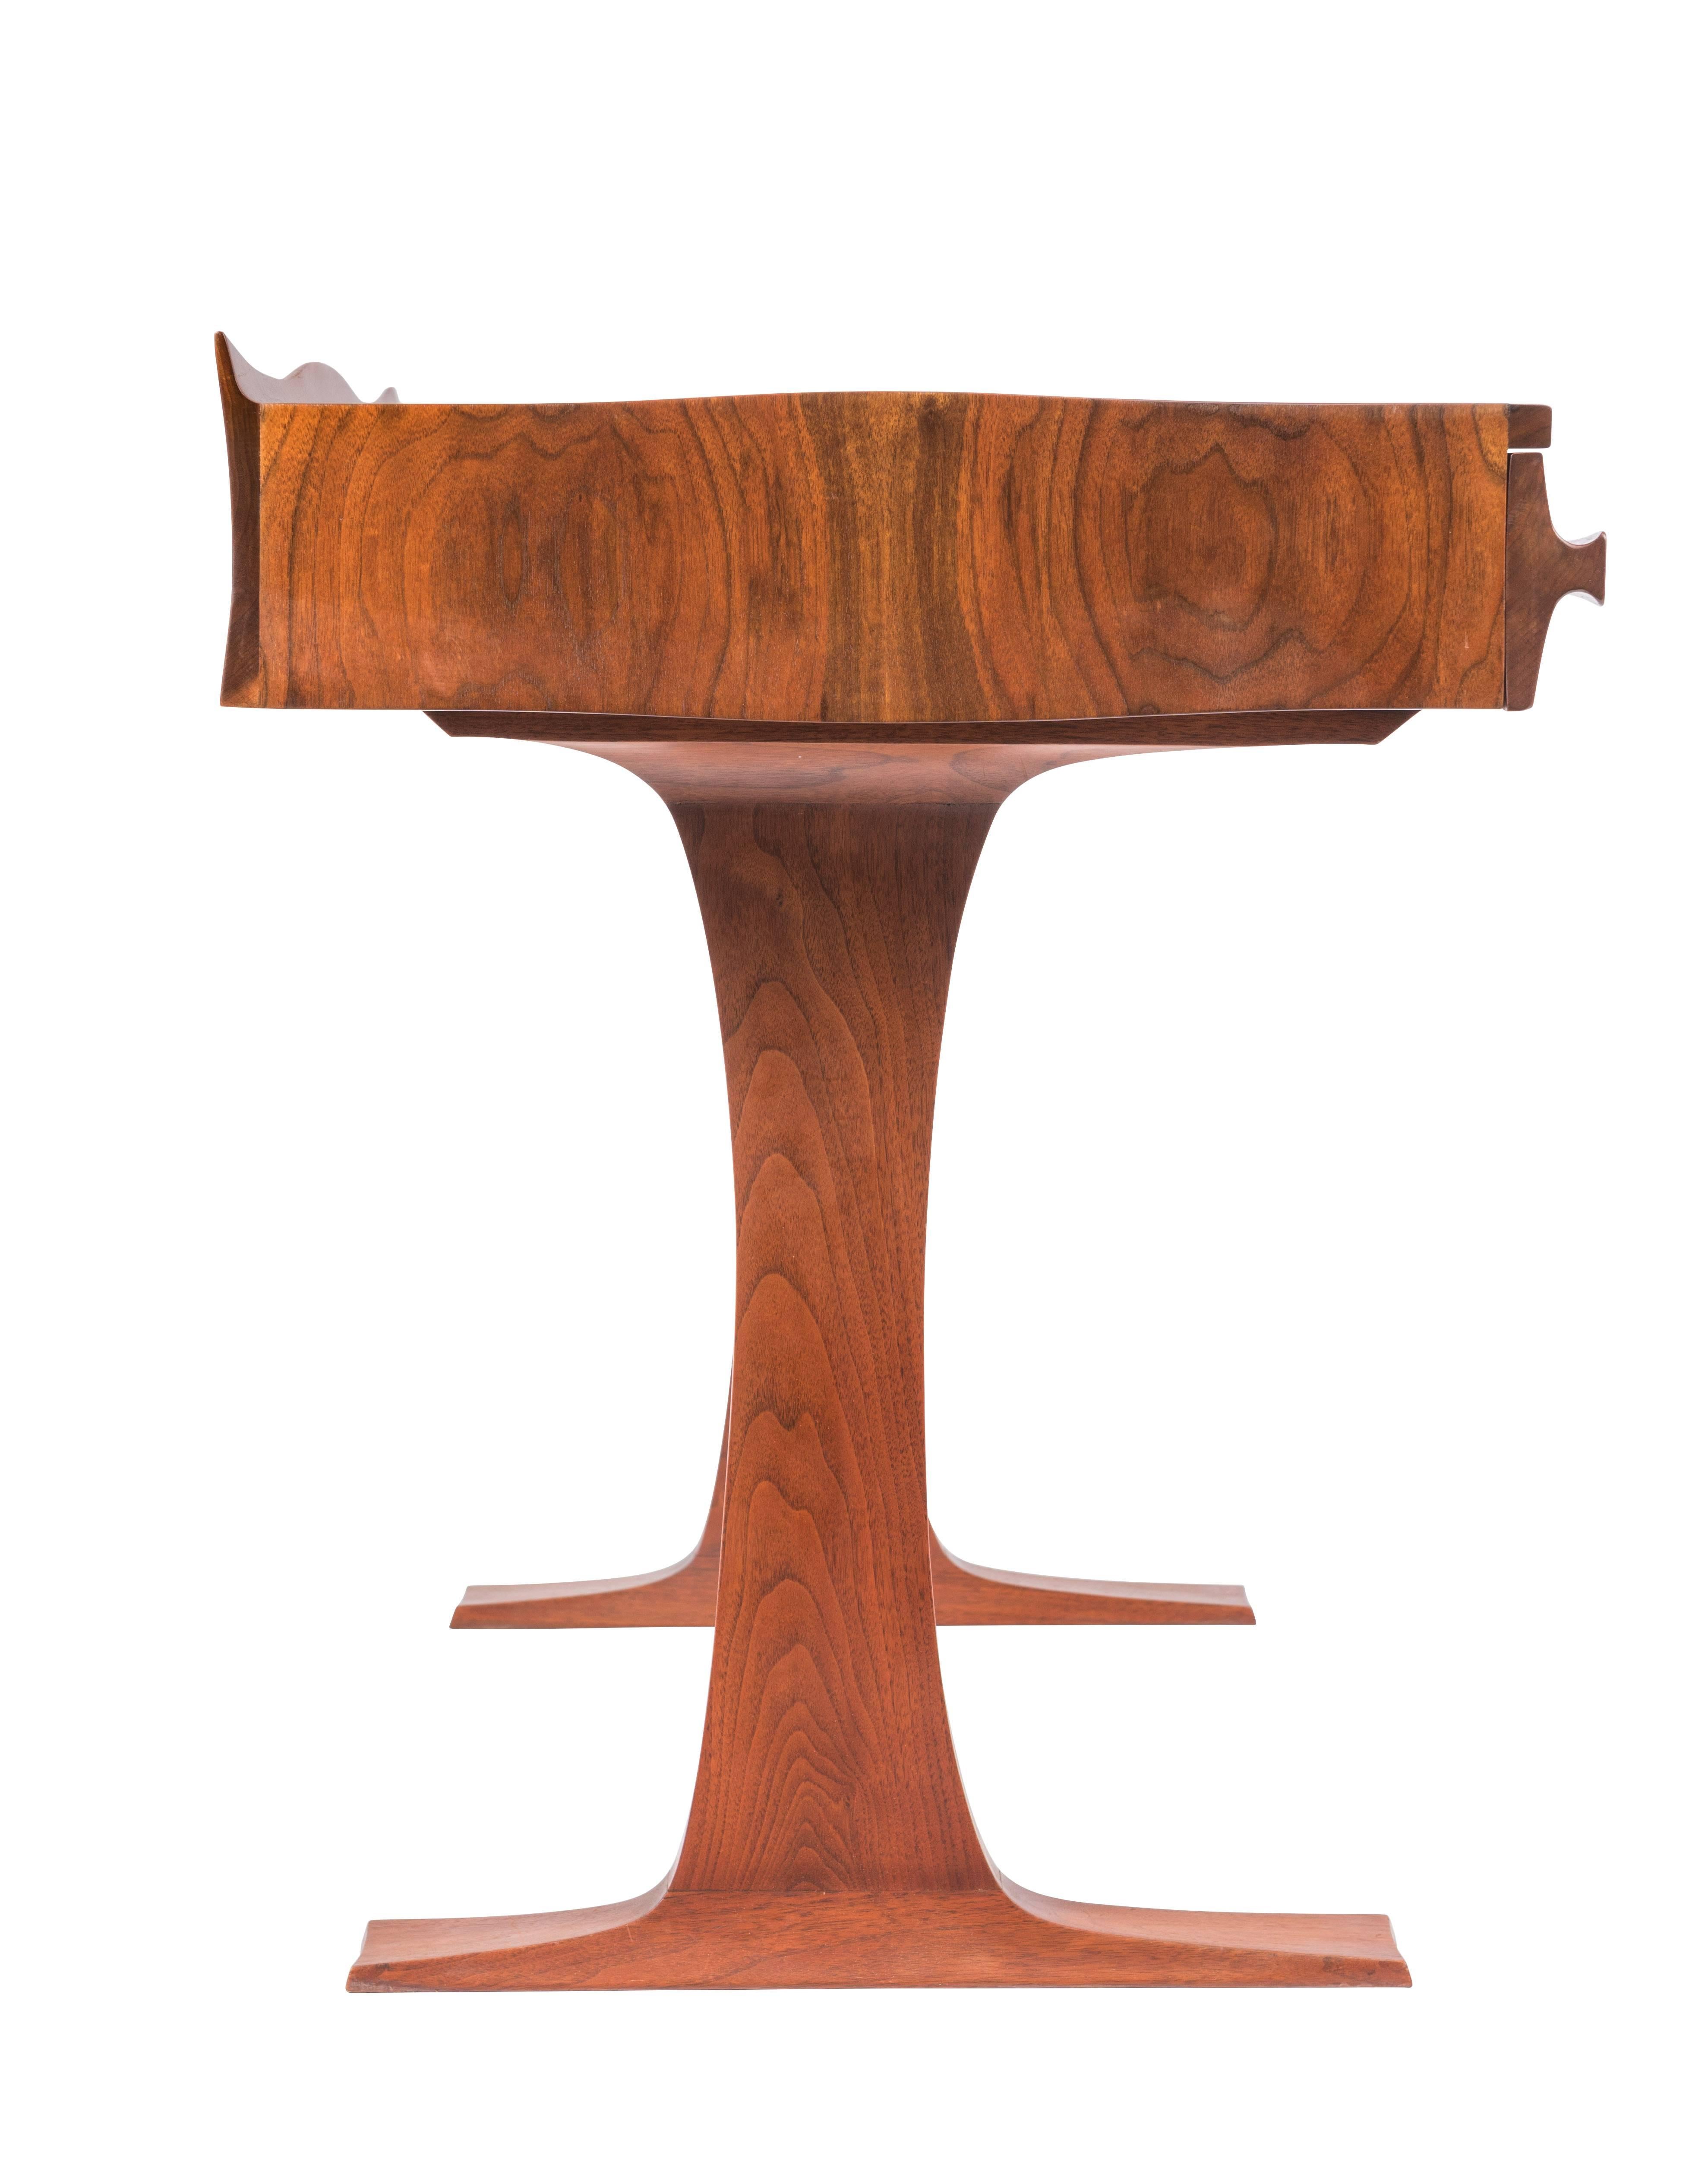 Hand-carved three-drawer walnut desk by Robert Whitley. This desk and the following listing are from a single owner named Florence Green, who commissioned Whitley to create a large collection of his work between 1965-1975 for her home in PA. Desk is